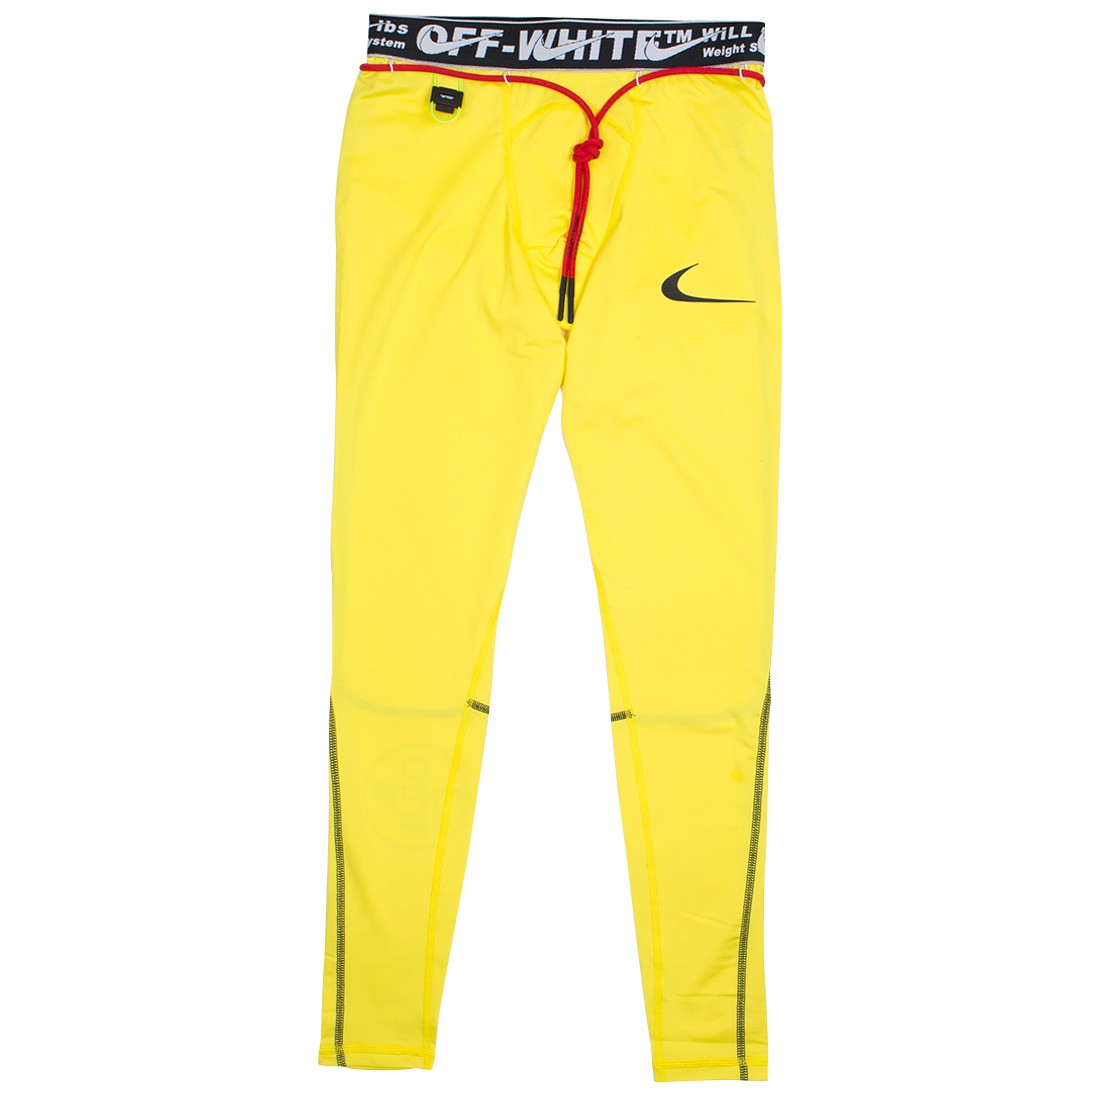 off white yellow tights